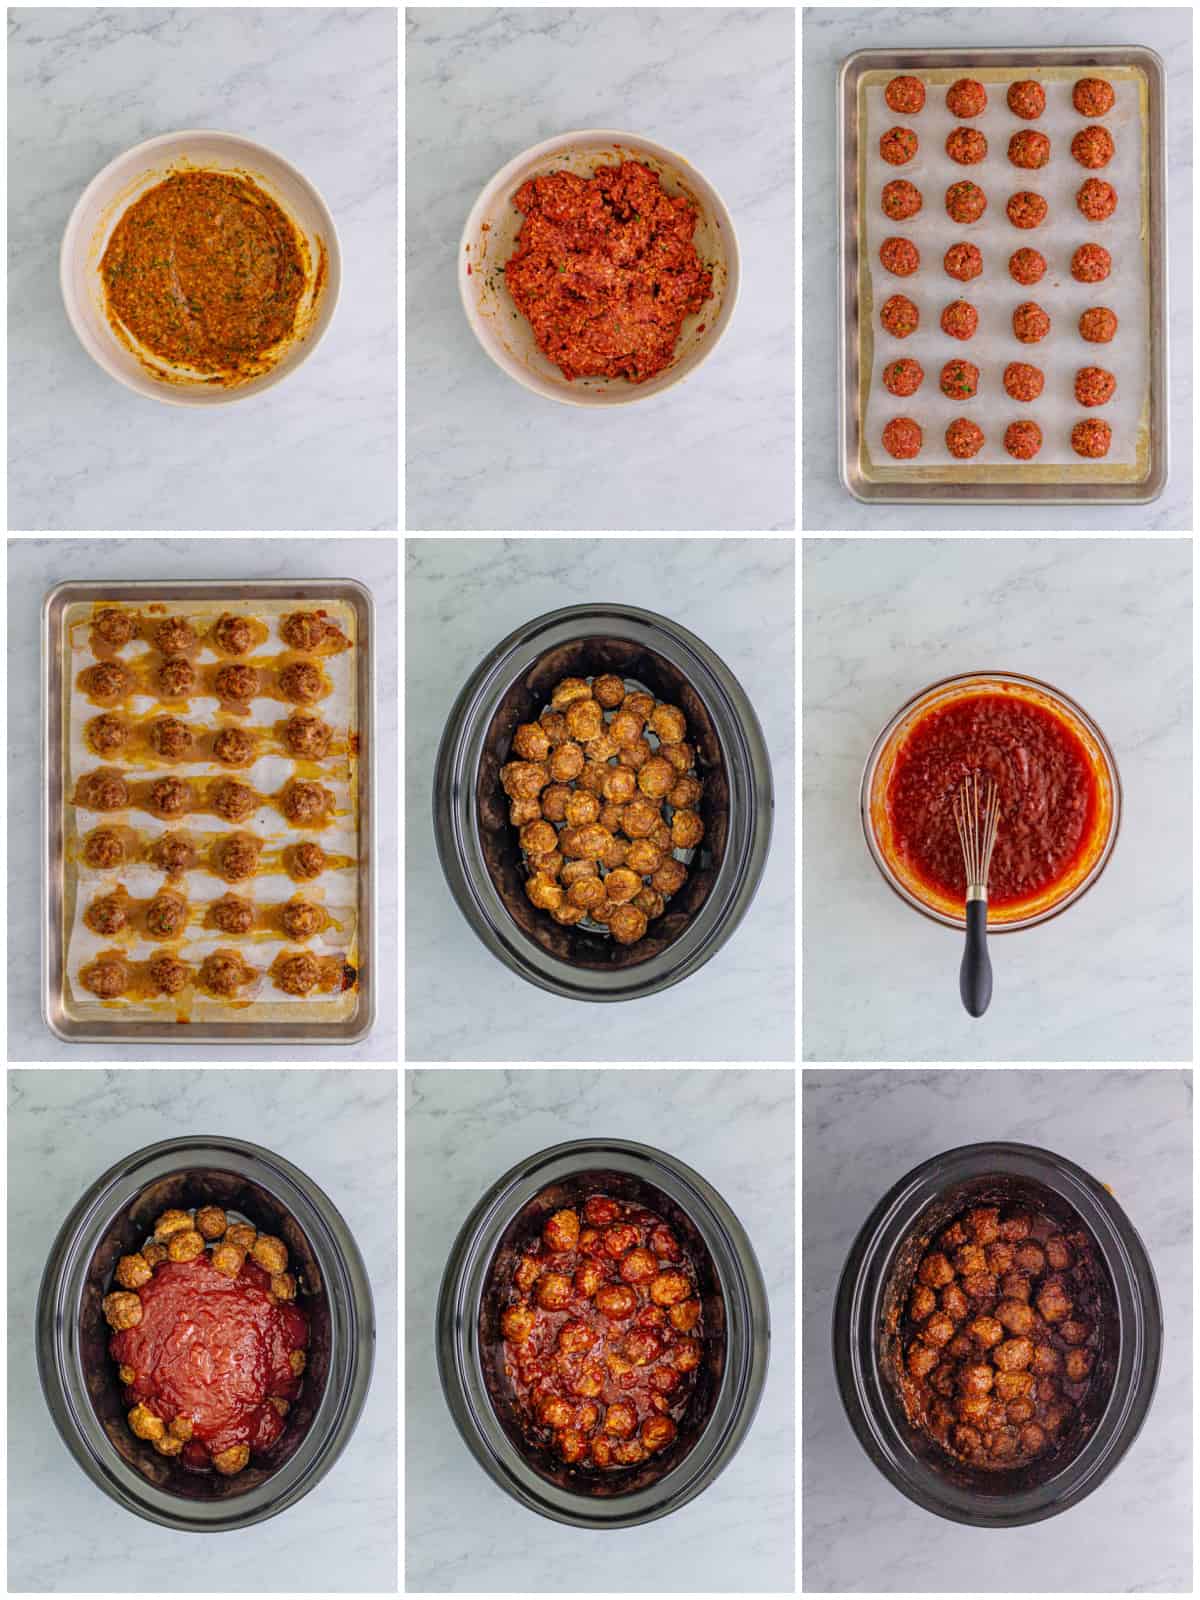 Step by step photos on how to make Cranberry Meatballs.